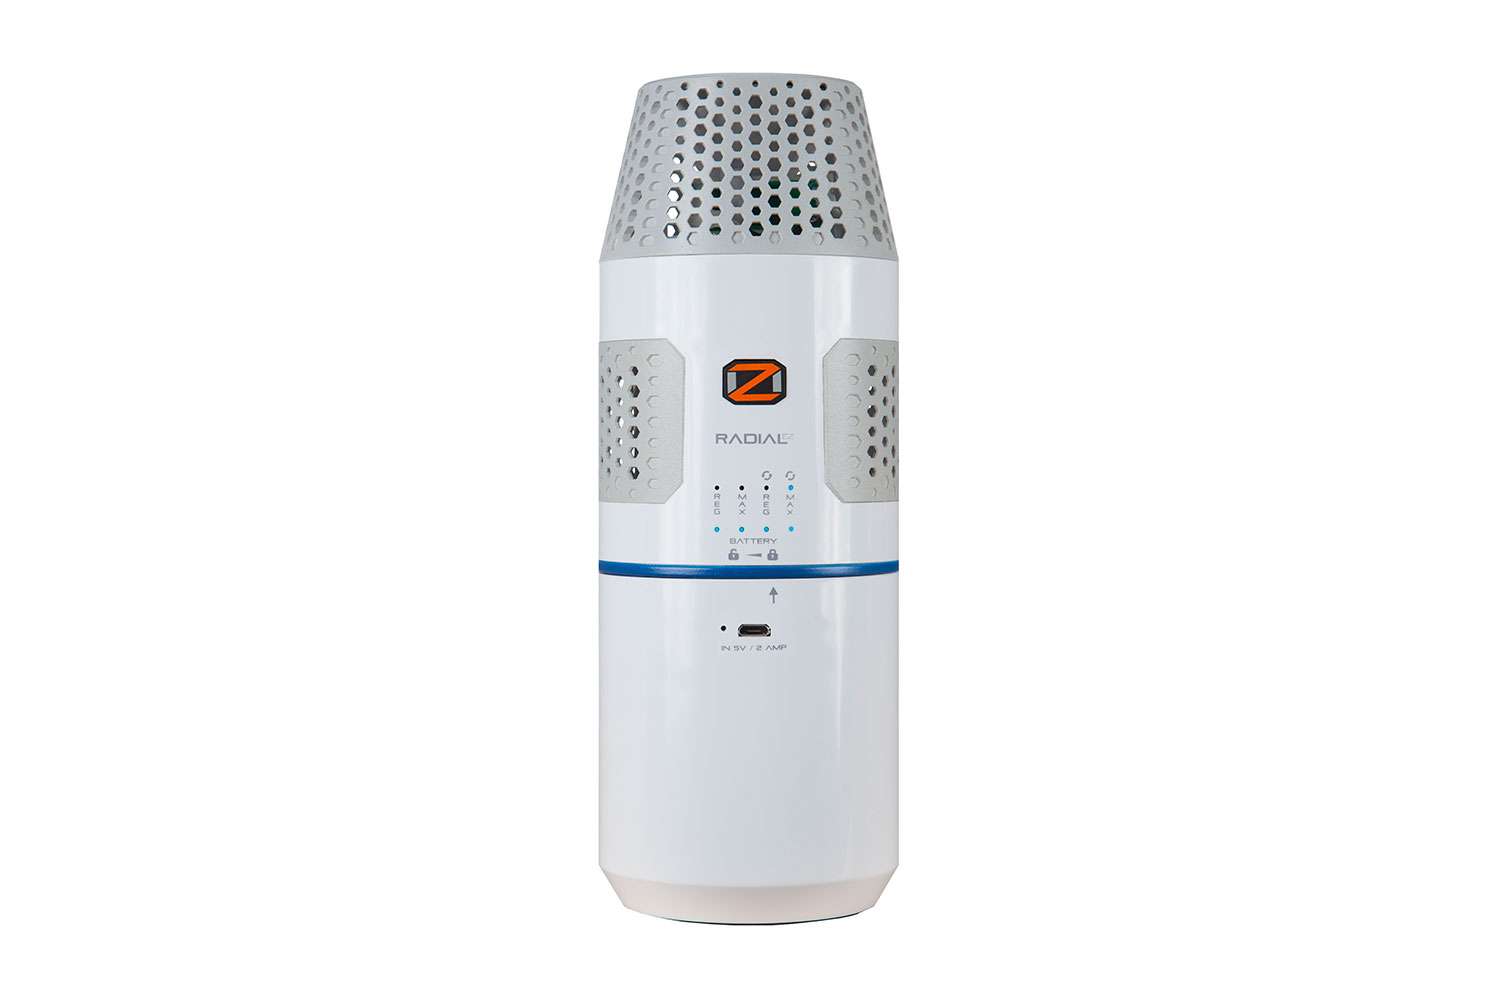  <B>ScentLok OZ Radial 400EZ Marine Odor Destroyer</B></p>

    <p><BR>The OZ Radial 400EZ by ScentLok is an all-in-one, portable, rechargeable ozone generator that destroys odors, bacteria, dust mites, mold, fungus and mildew. Perfect for the truck, boat, garage, workshop or eliminating fishy odors in the home or kitchen, the versatile OZ Radial 400 can be hung by its included tether, placed in a cup holder or on any flat surface. It emits a powerful stream of ozone in 360 degrees, offers multiple operating modes and will charge mobile devices via its built-in USB port. Radial operates for up to eight hours per charge. These all-new dedicated marine models will be available in Marine White and another exciting finish to be unveiled at ICAST 2019. 
<BR>
<B>MSRP: $249.99</B></p>

<p><a href=